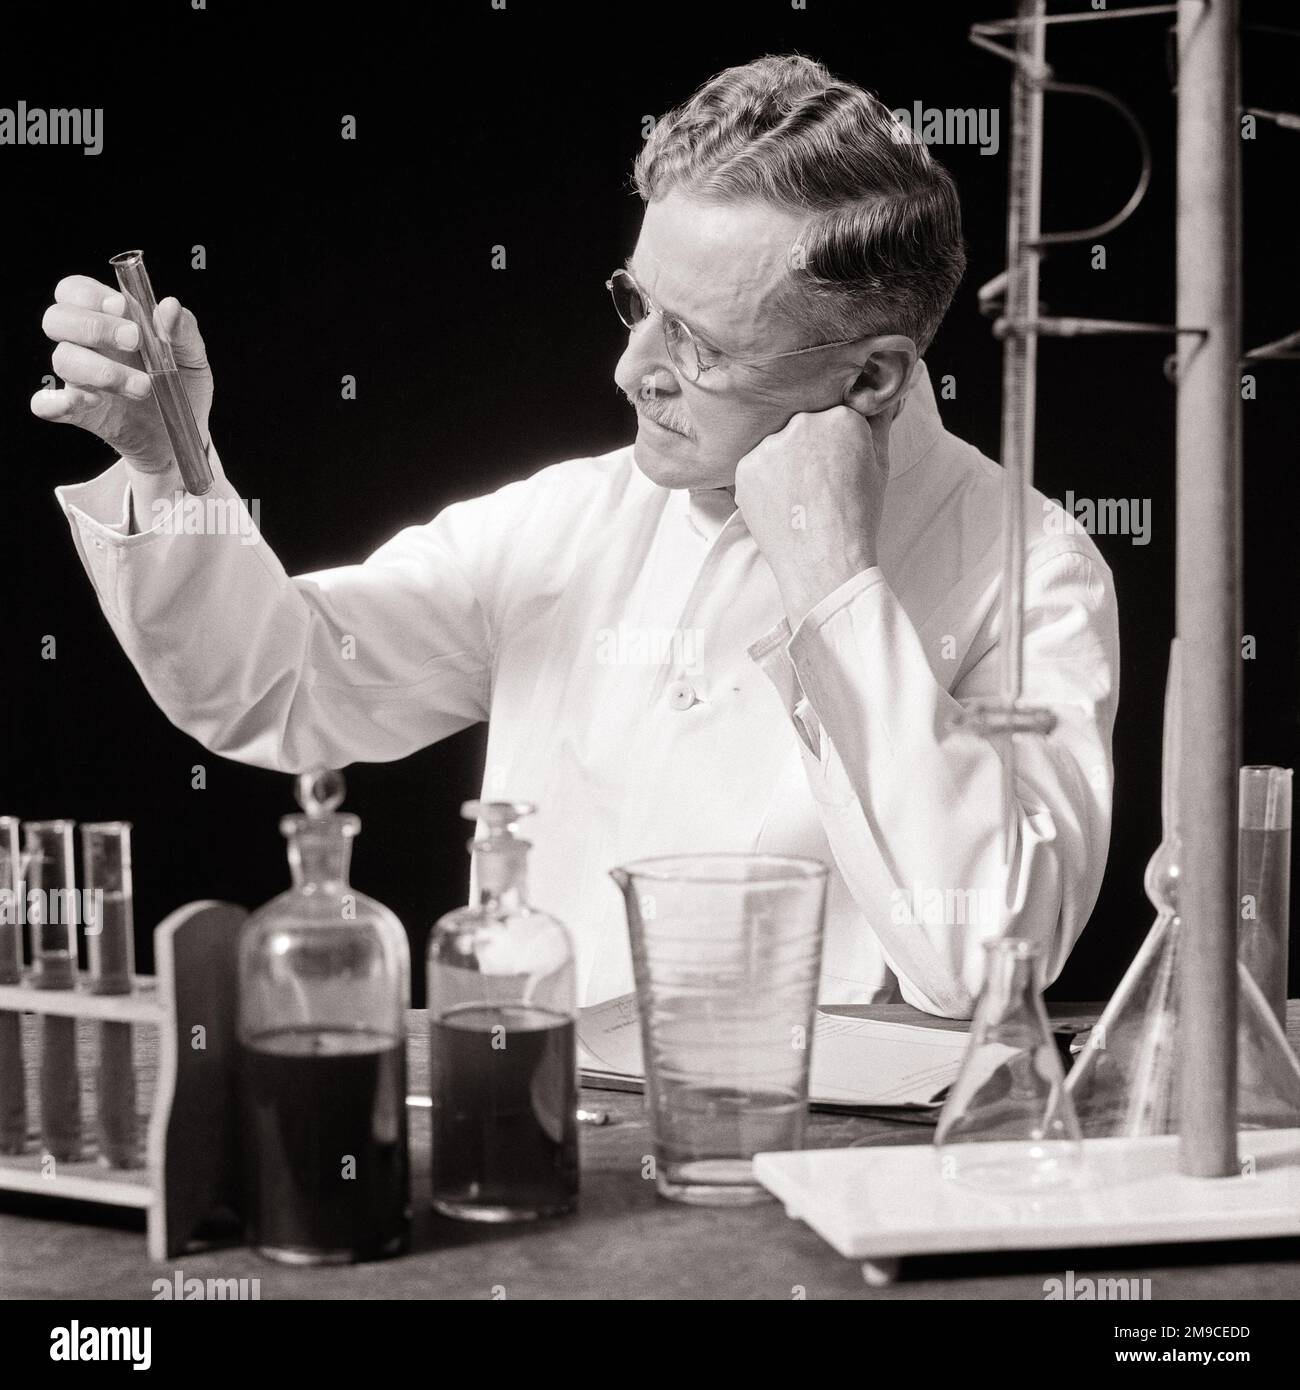 1930s MAN RESEARCH CHEMIST IN WHITE LAB COAT WEARING GLASSES WORKING EXAMINING TEST RESULTS THINKING PONDERING IN HIS LABORATORY - l1246 HAR001 HARS MALES MIDDLE-AGED B&W MIDDLE-AGED MAN GOALS HEALTHCARE VISION DREAMS PREVENTION DISCOVERY HIS HEALING CHEMIST SCIENTIFIC DIAGNOSIS BEAKER EXAMINING LEADERSHIP INNOVATION HEALTH CARE OCCUPATIONS TREATMENT RESULTS PONDERING CONCEPTUAL SINCERE SOLEMN CREATIVITY FOCUSED INTENSE SOLUTIONS TEST TUBES BLACK AND WHITE CAREFUL CAUCASIAN ETHNICITY DISEASE EARNEST HAR001 INTENT LABORATORIES LABS OLD FASHIONED Stock Photo